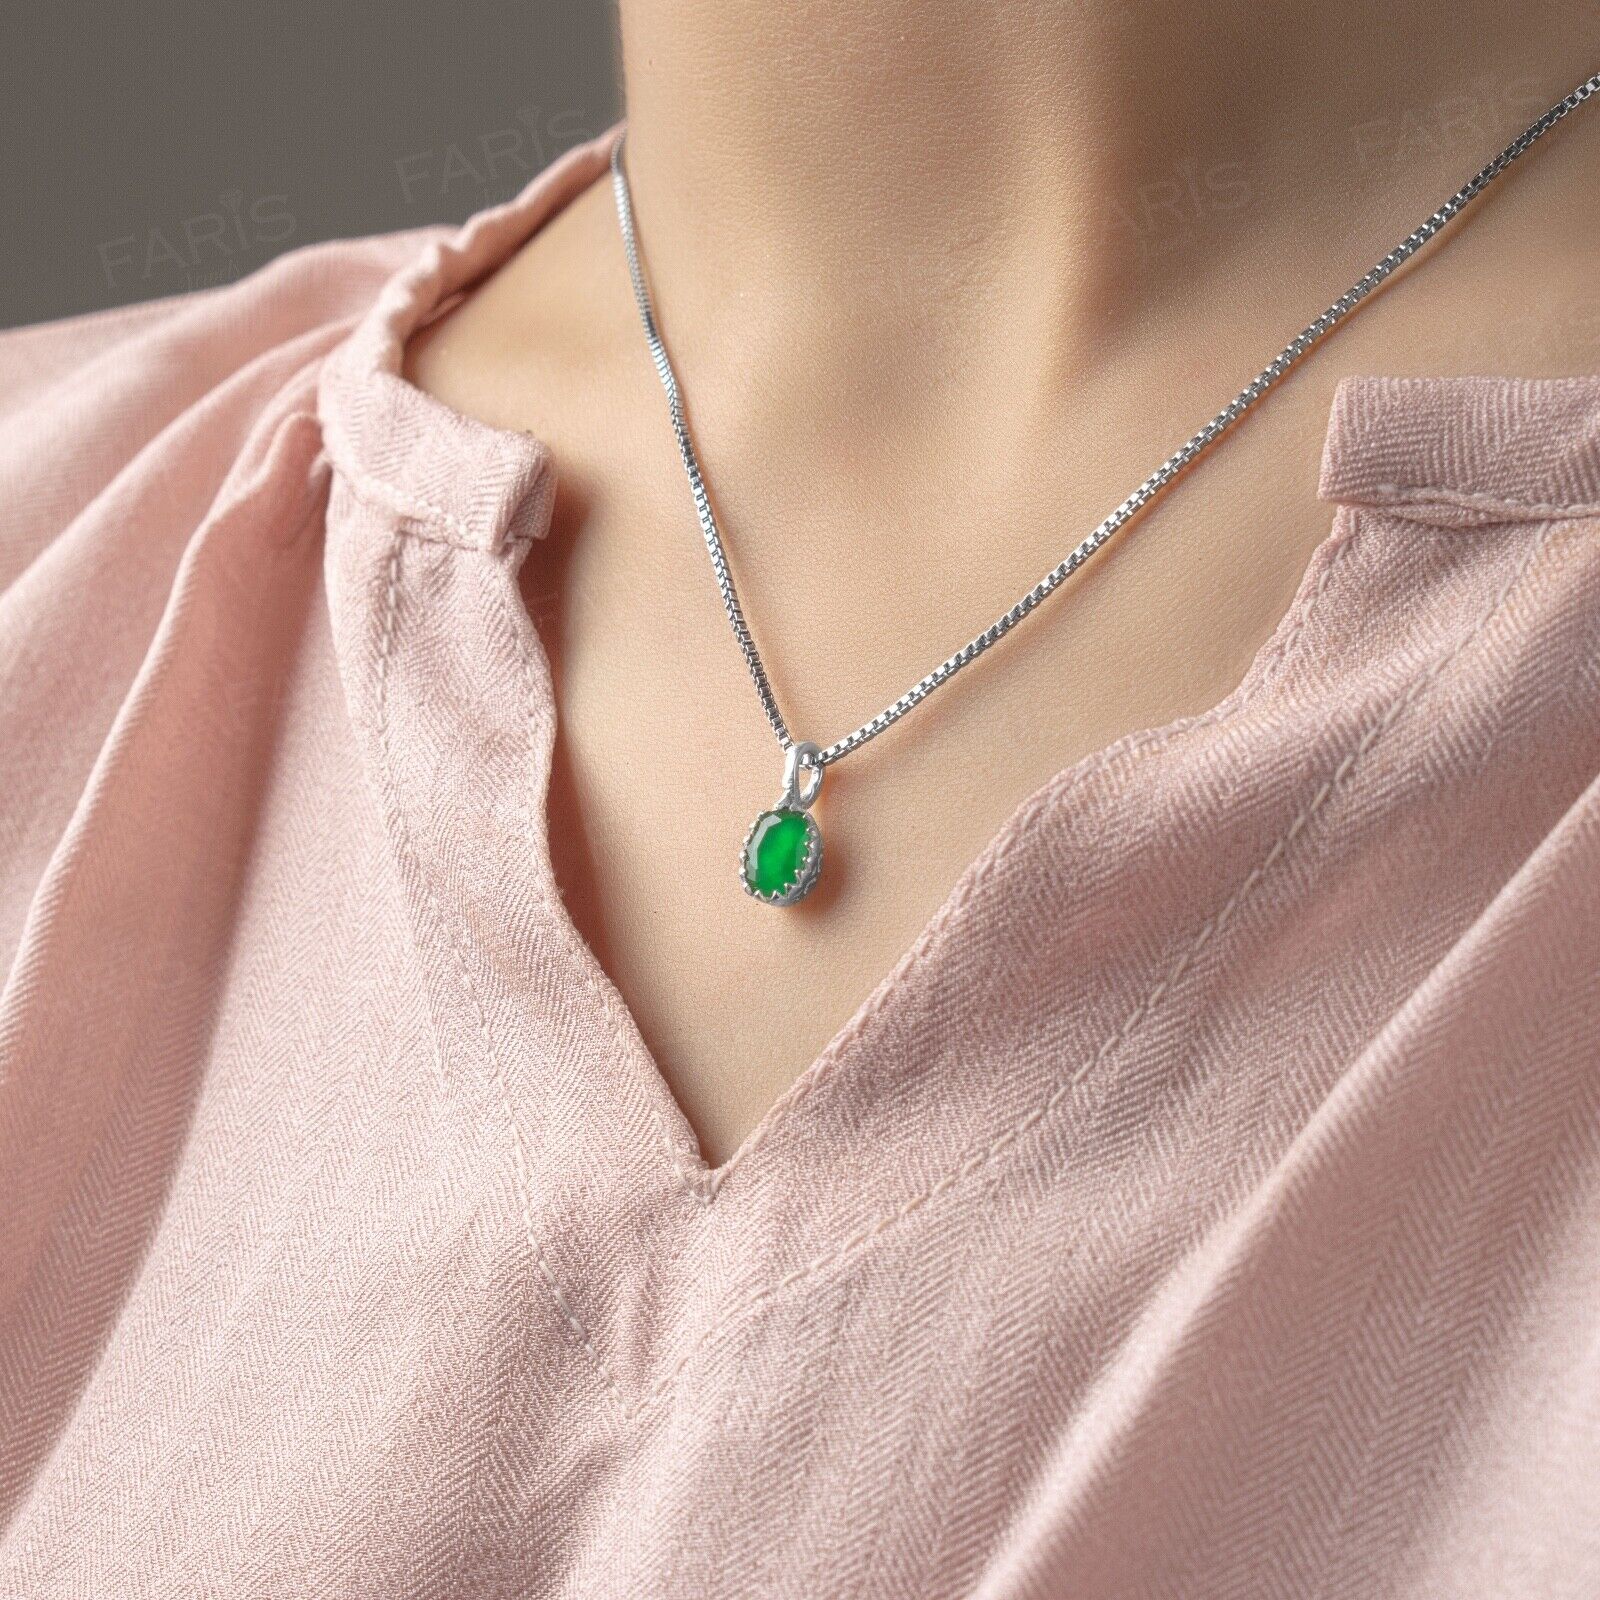 Small 925 Sterling Silver Oval Cut Emerald Gemstone Ladies Pendant Necklace Gift